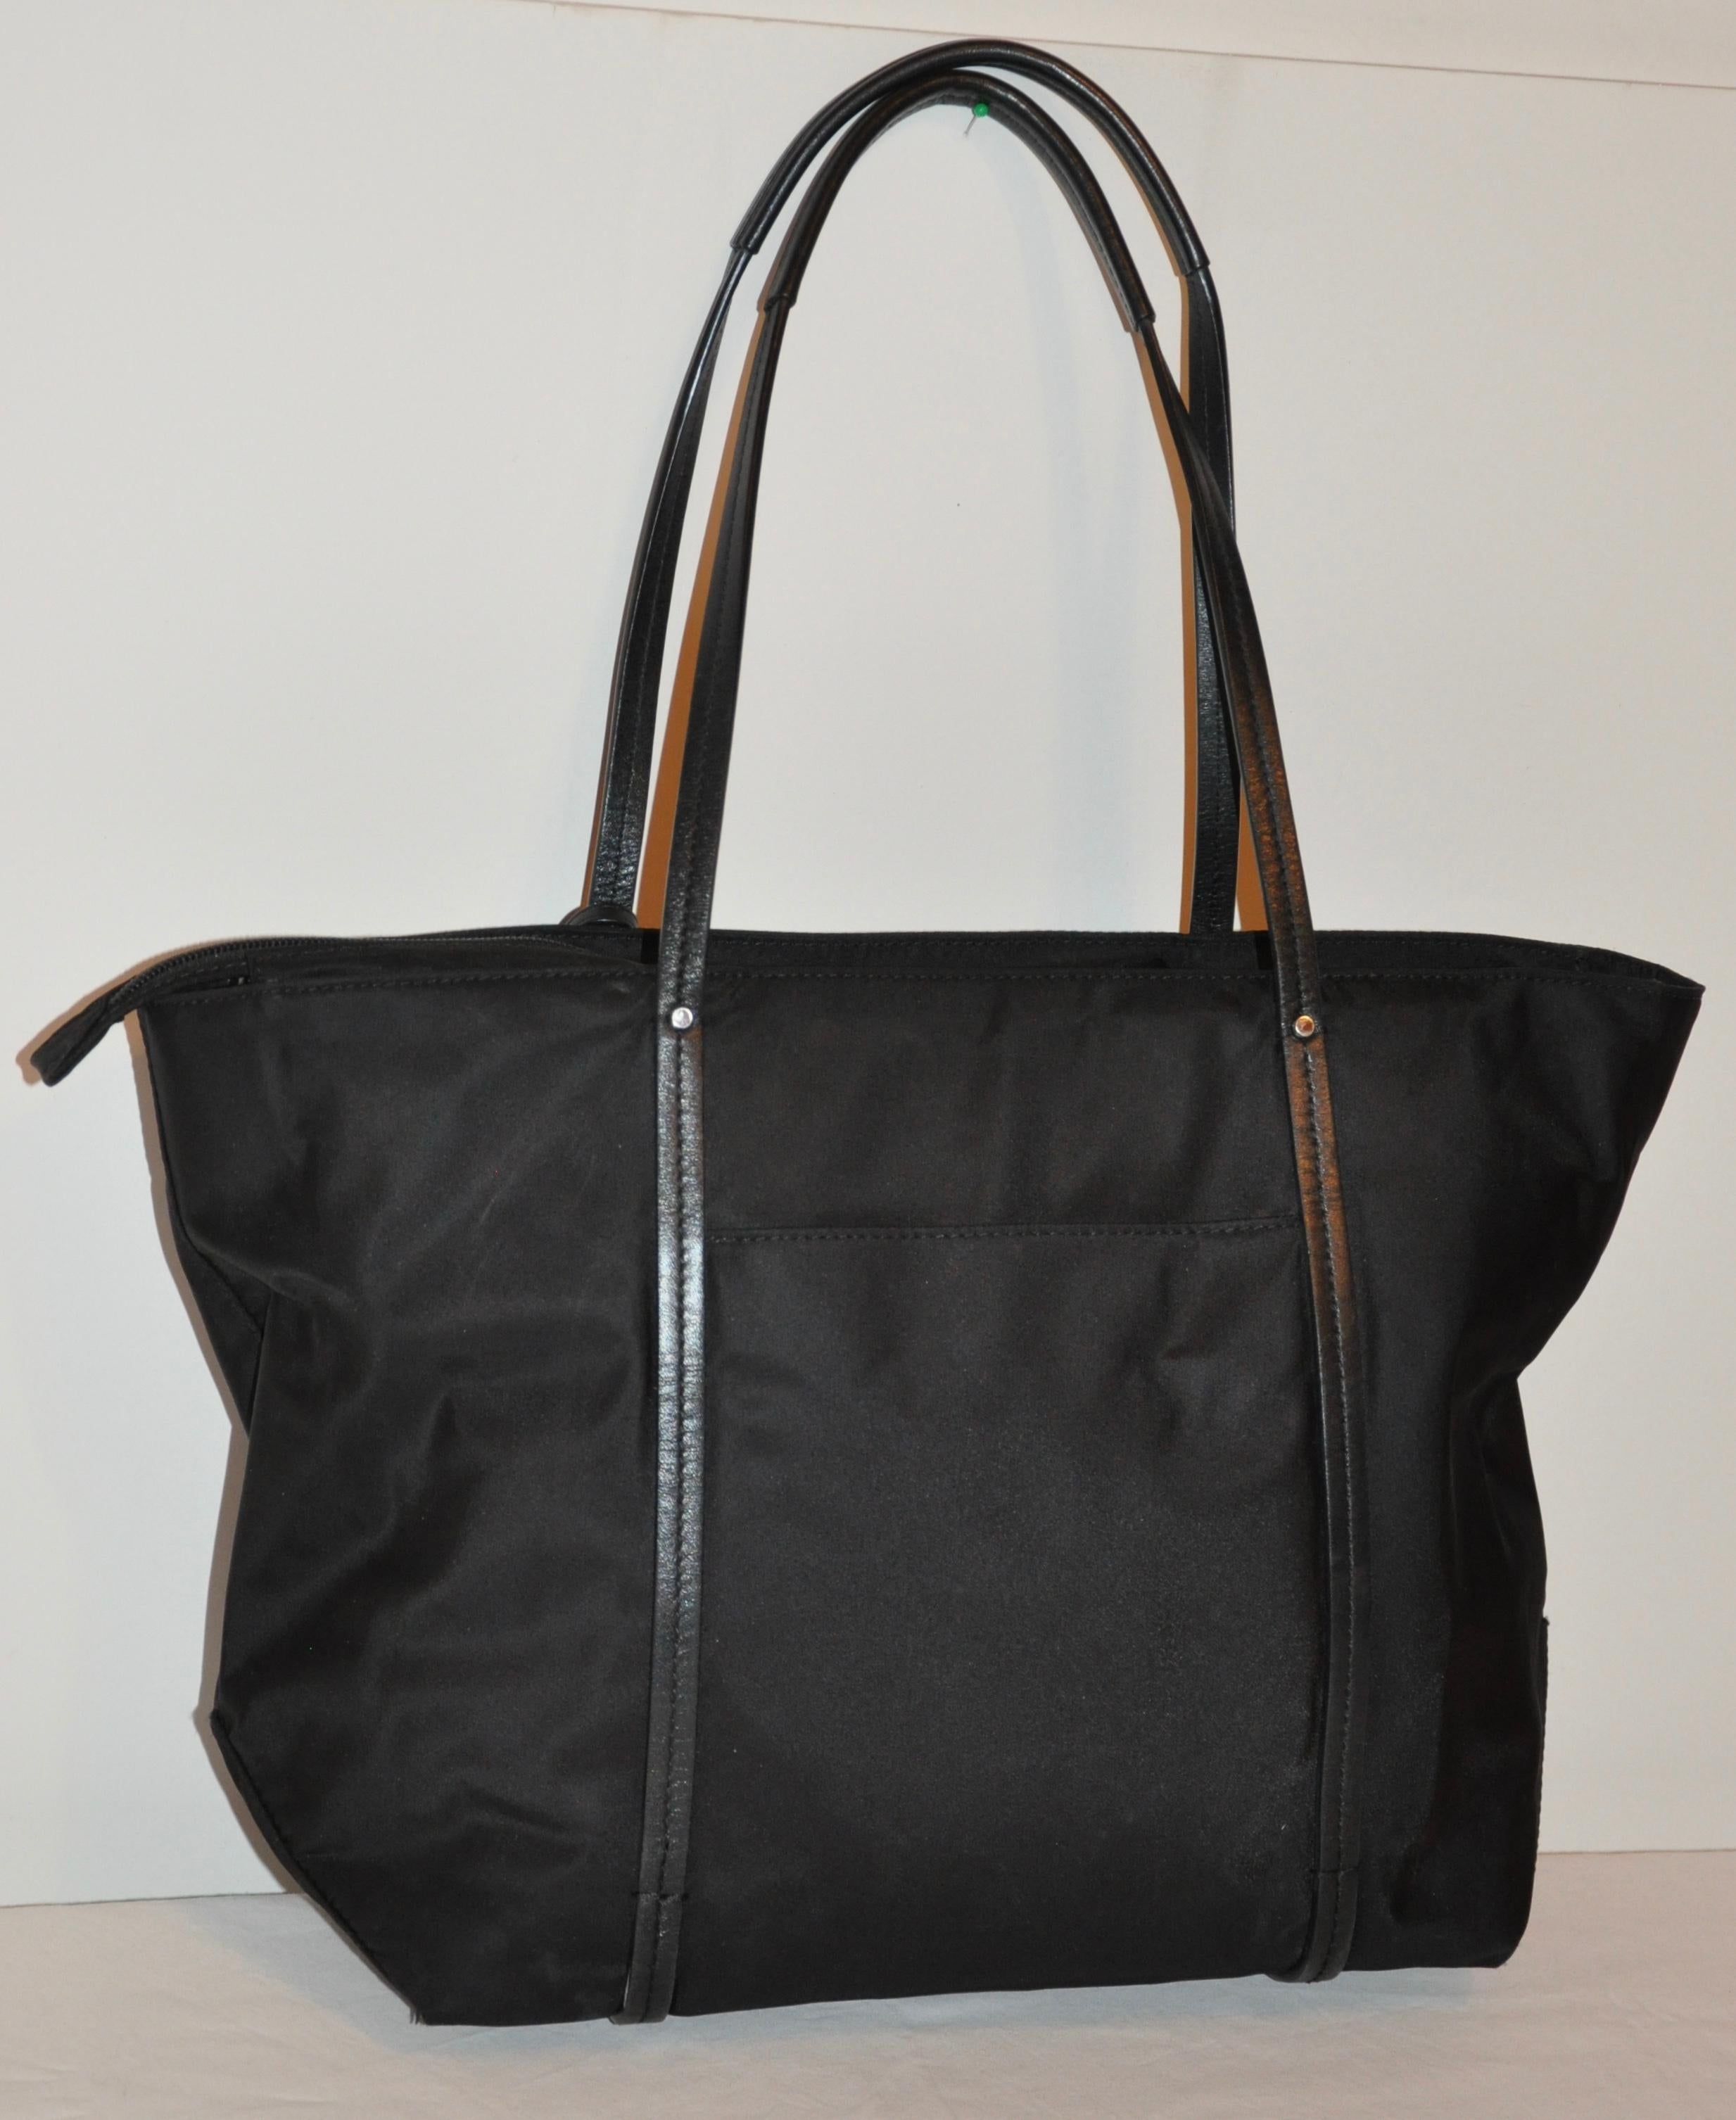 Tumi Black Nylon Accented with Black Calfskin Travel Tote In Good Condition For Sale In New York, NY